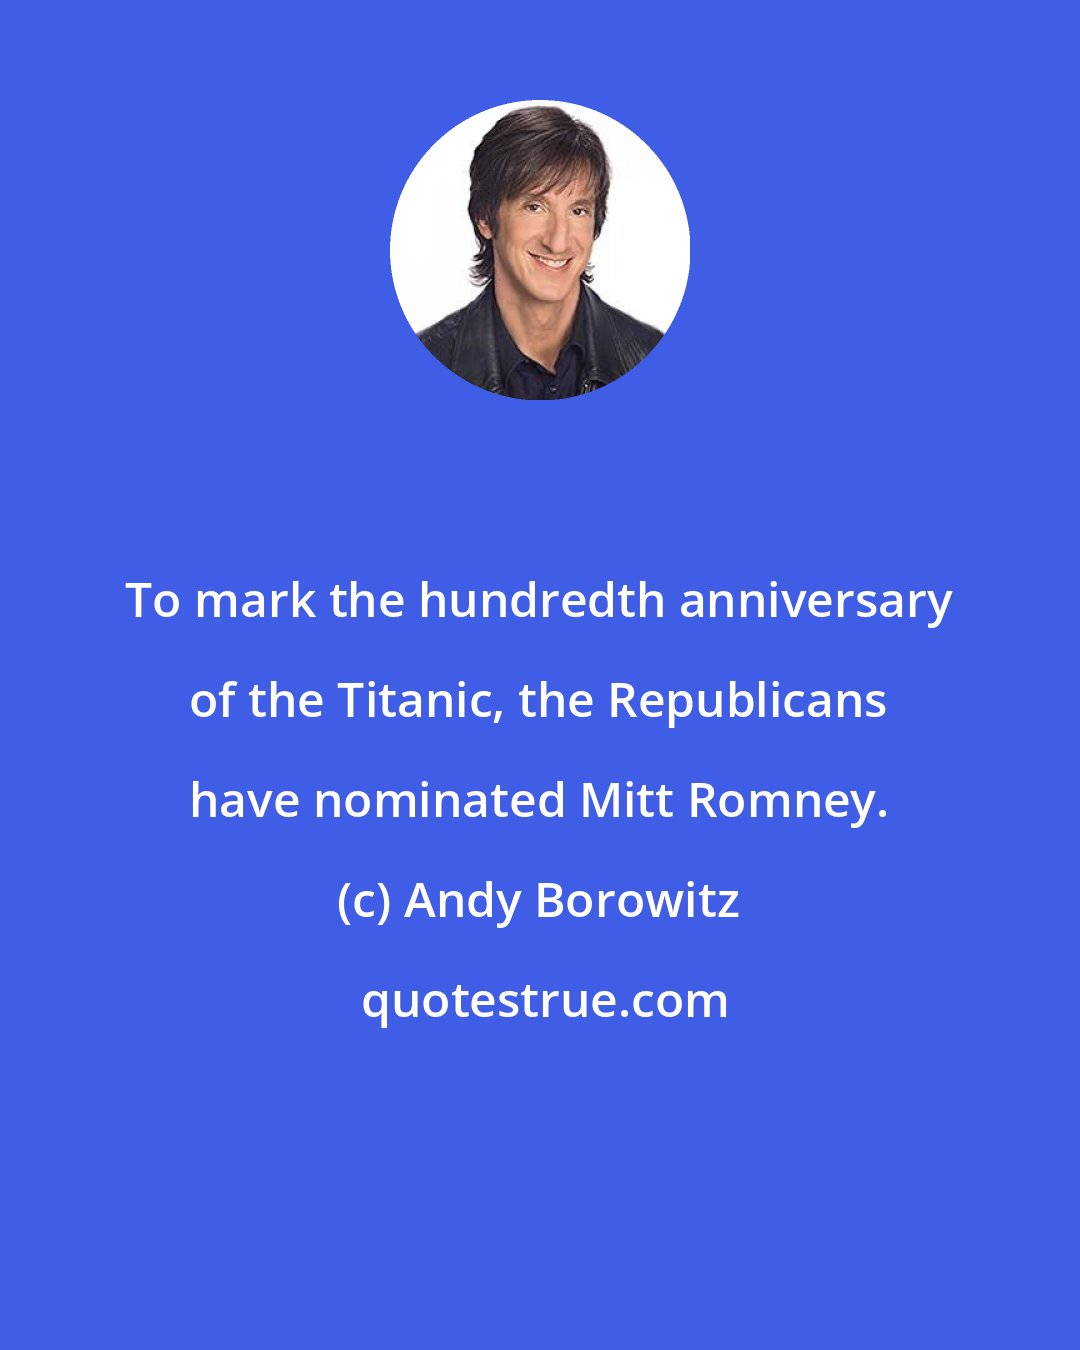 Andy Borowitz: To mark the hundredth anniversary of the Titanic, the Republicans have nominated Mitt Romney.